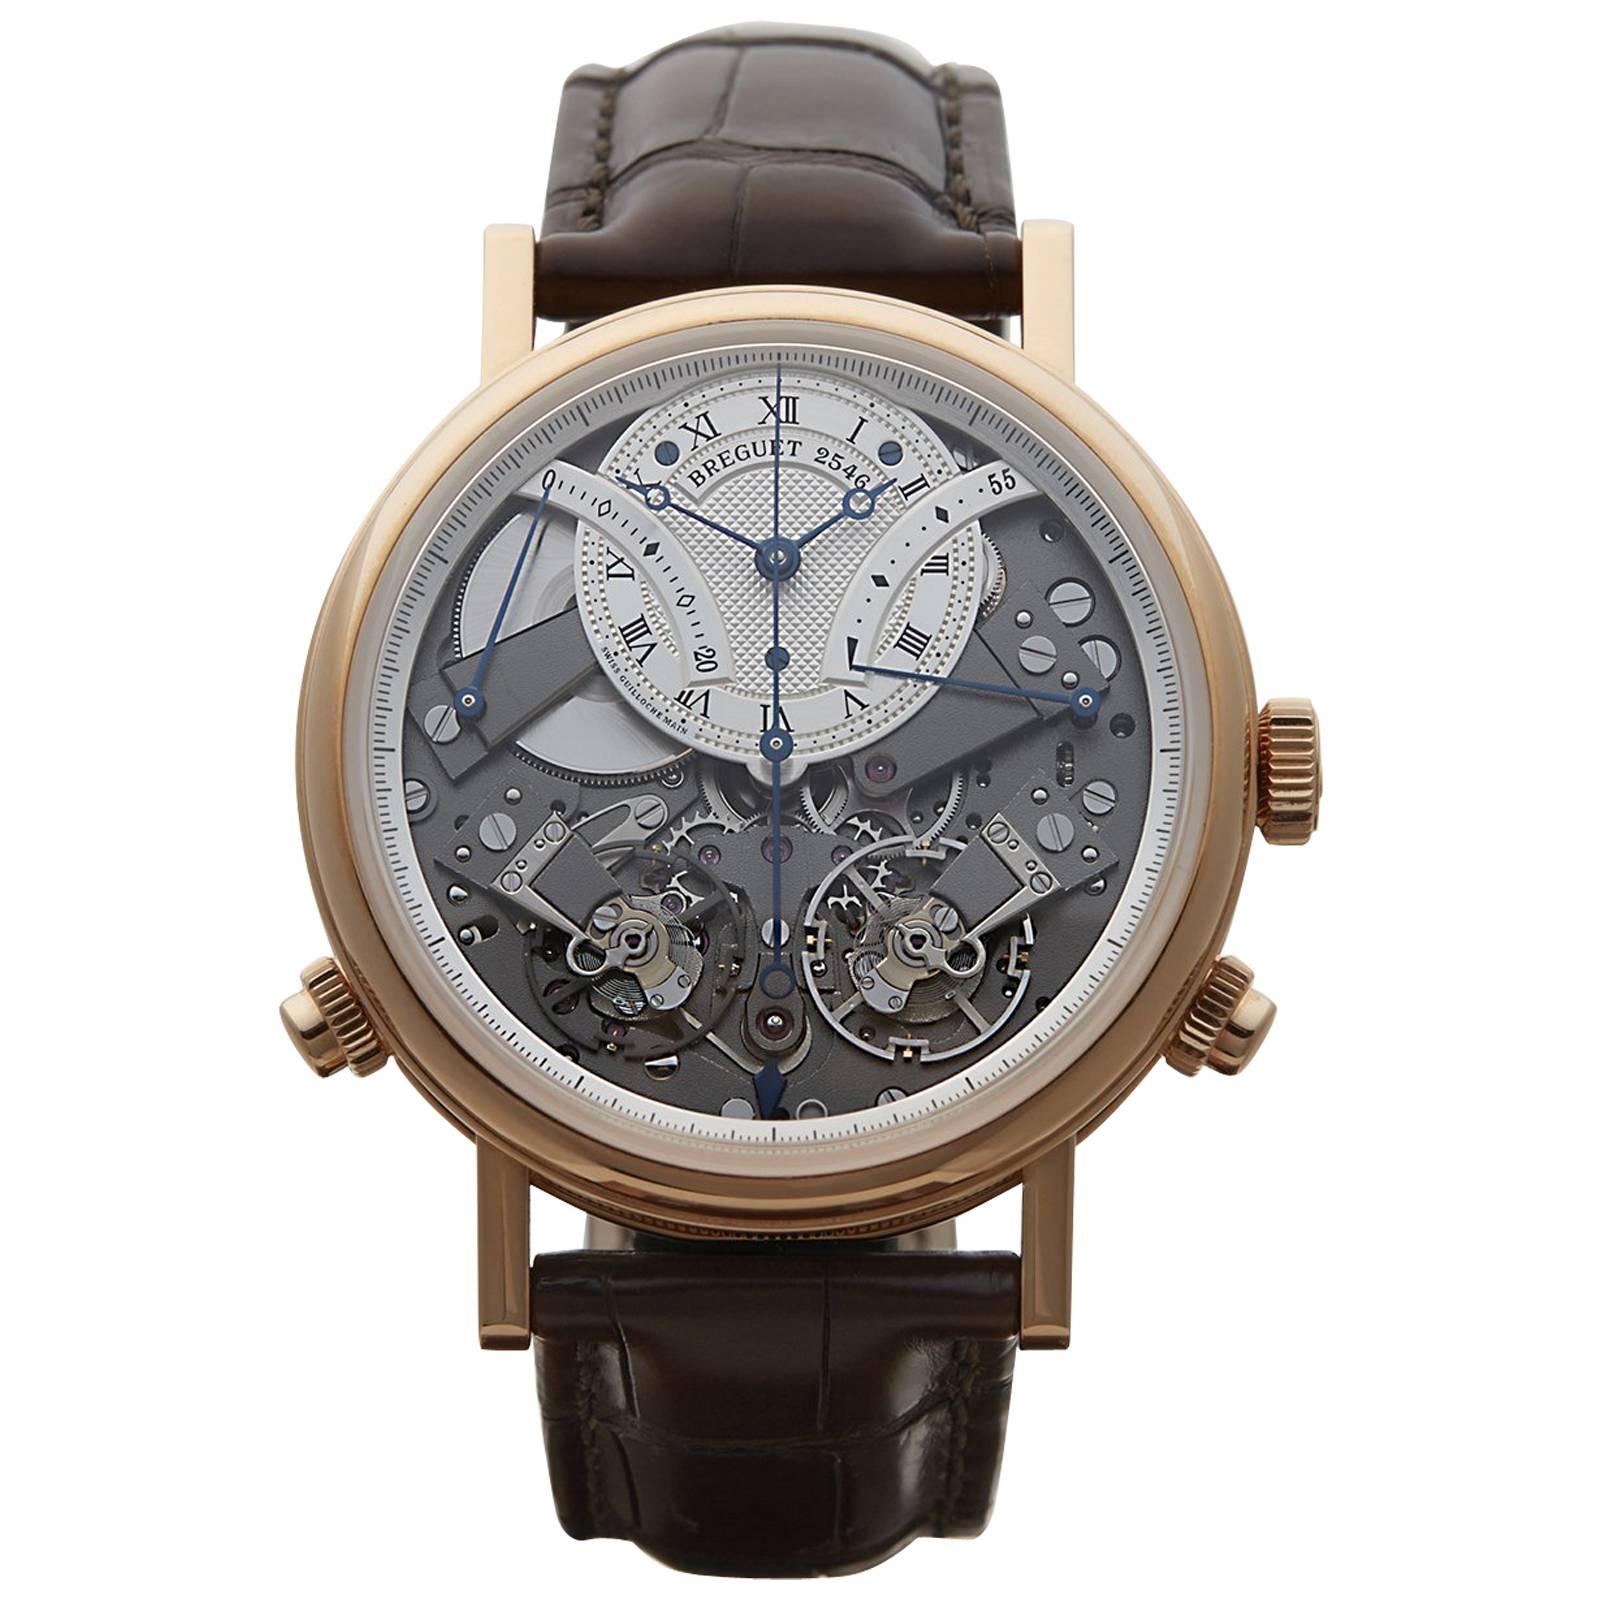  Breguet Rose Gold Skeleton Dial Tradition Mechanical Wind Wristwatch